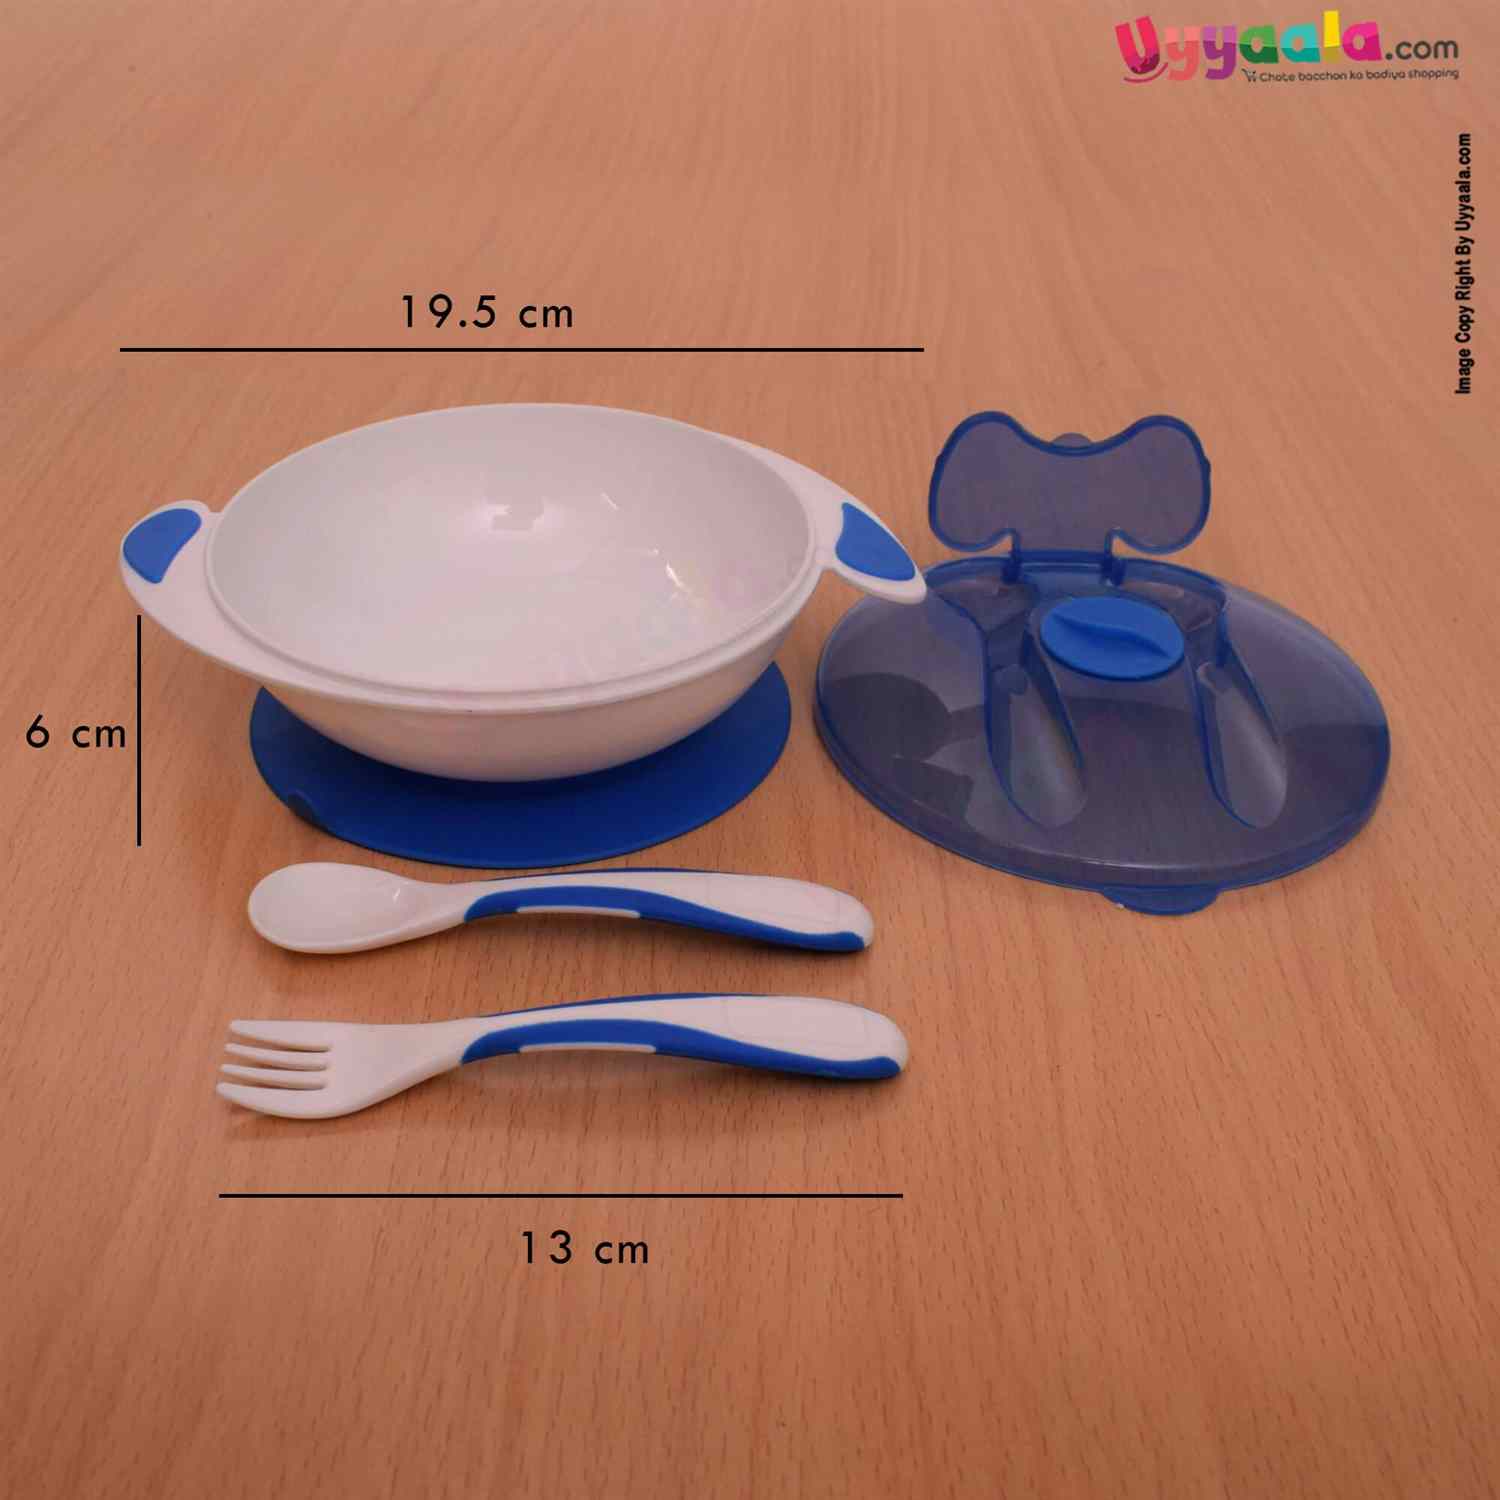 MUMLOVE Baby Suction Bowl & Spoons 10+m Age, Blue